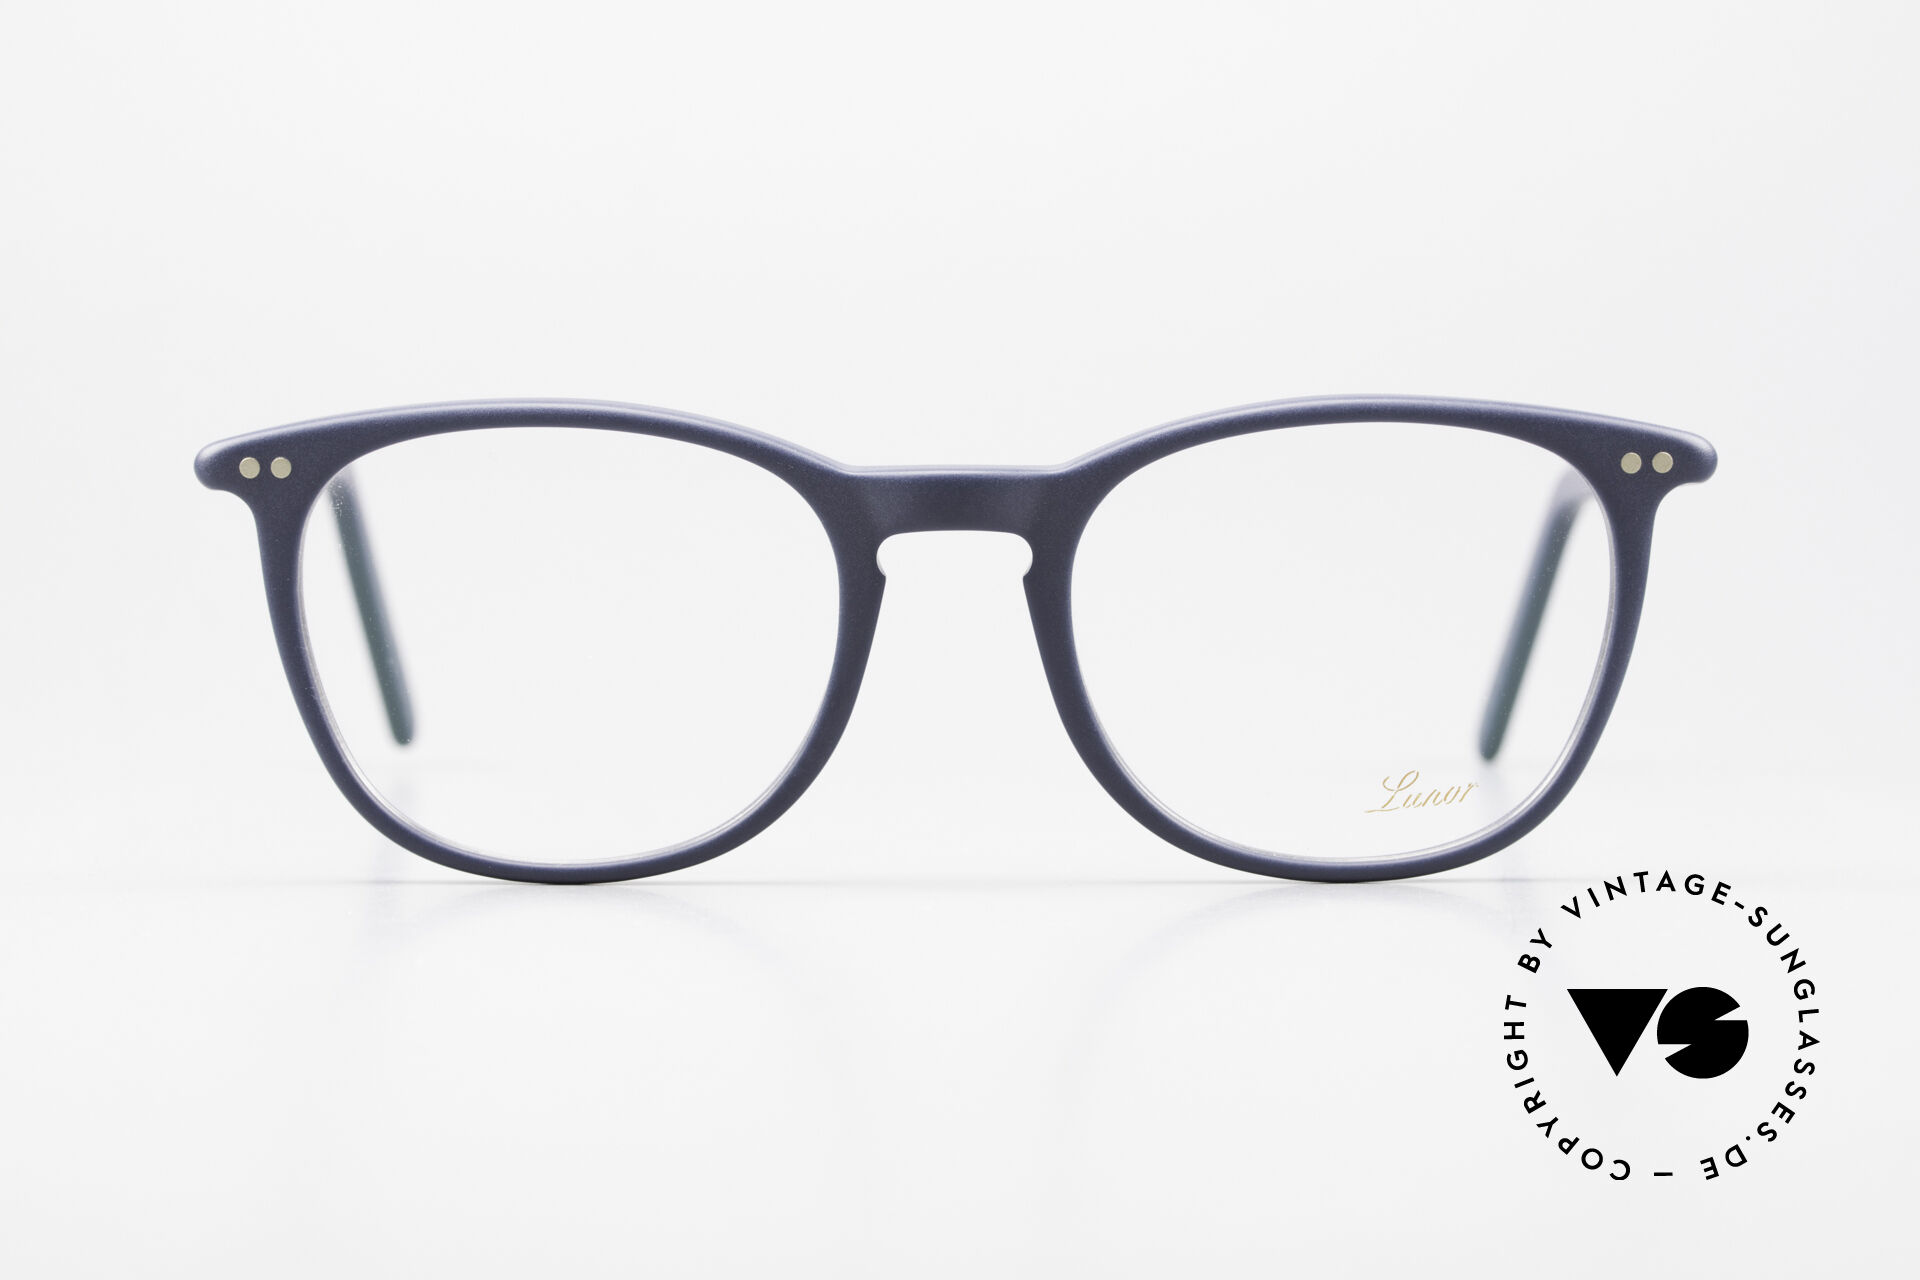 Glasses Lunor A5 234 A5 Collection Acetate Frame